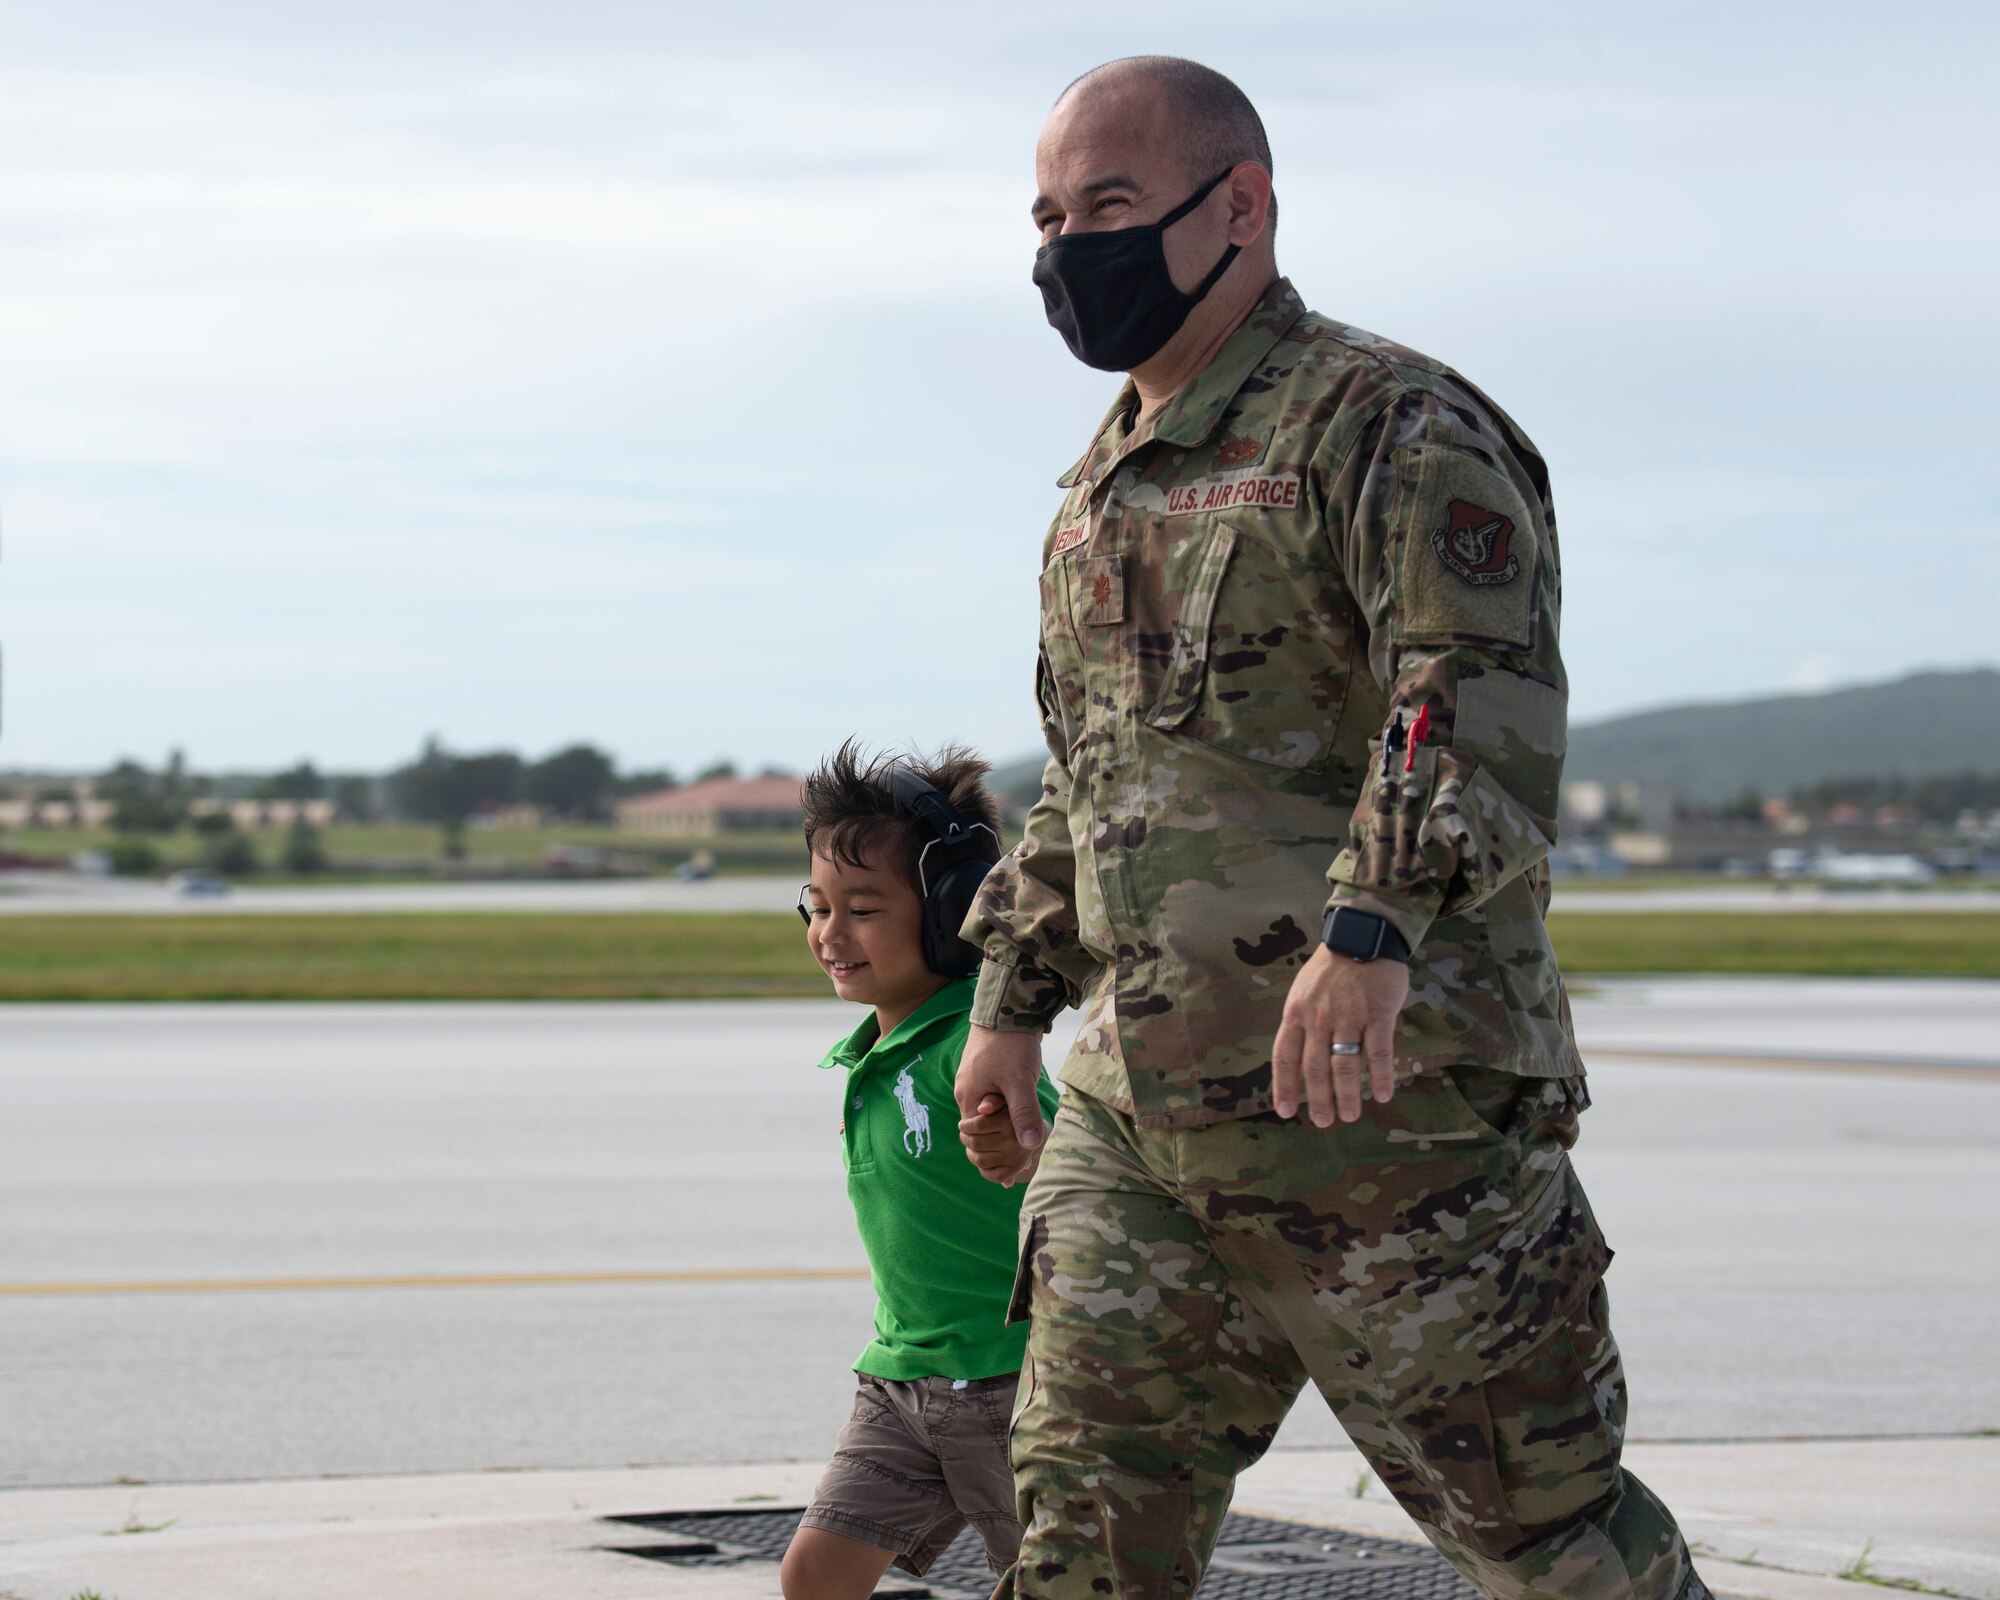 Maj. Elkin Medina 36th Expeditionary Aircraft Maintenance Squadron commander, walks with a fellow Airman's child during a group flight line engagement for Exercise Cope North 2021 at Andersen Air Force Base, Guam, Feb. 5, 2021. Exercise Cope North 2021 is an annual U.S. Pacific Air Forces joint/combined, trilateral field training exercise occurring Feb. 3-19, 2021. (U.S. Air Force photo by Senior Airman Aubree Owens)